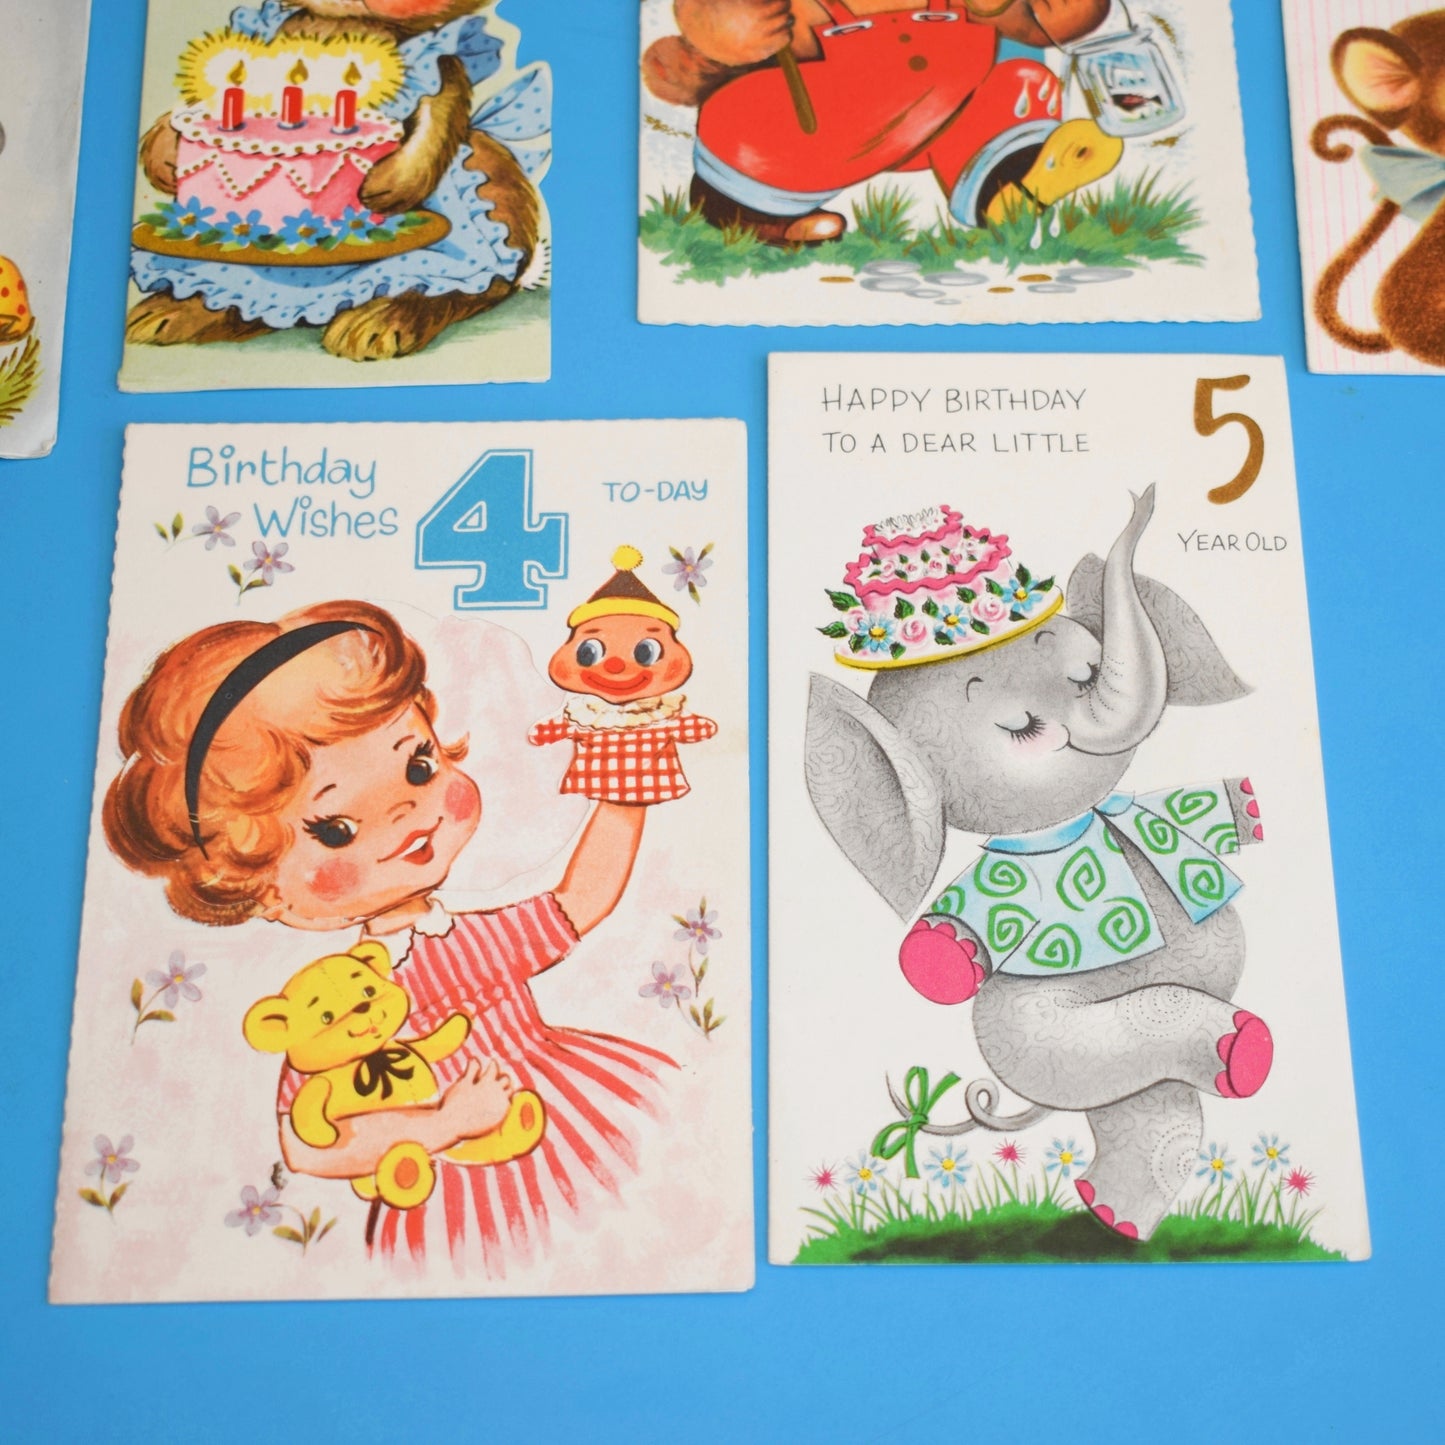 Vintage 1950s/ 60s Used Birthday Greeting Cards - Great To Frame